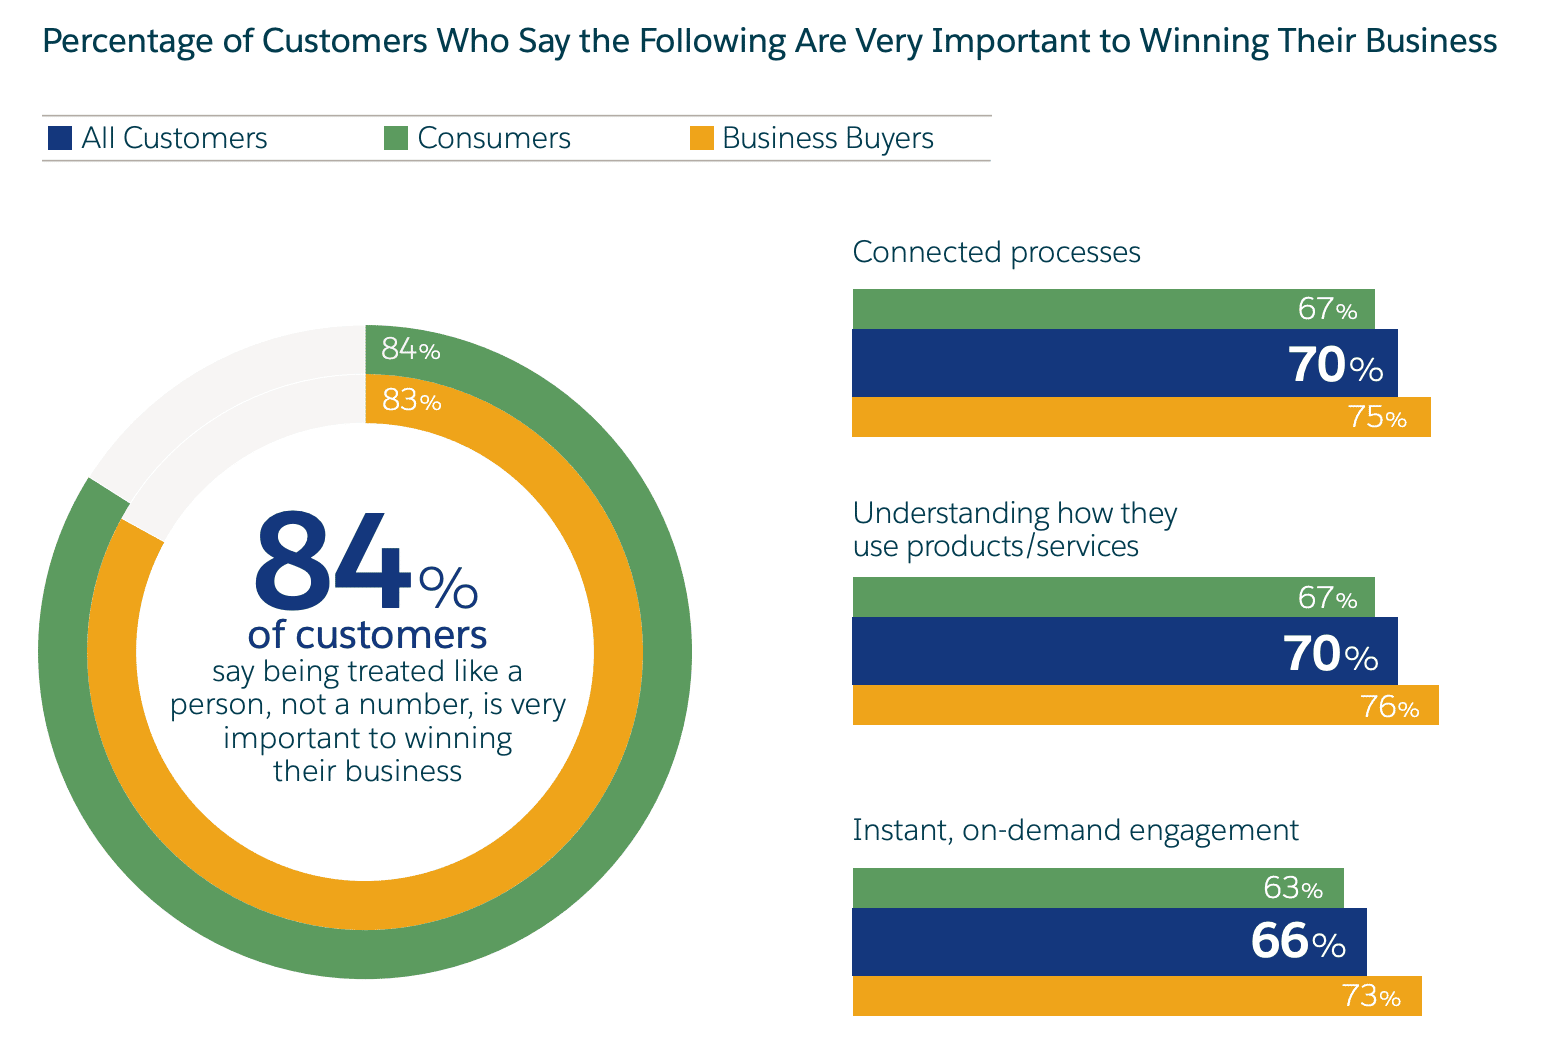 Salesforce research shows 84% of buyers say being treated like a person, not a number, is very important to winning their business.